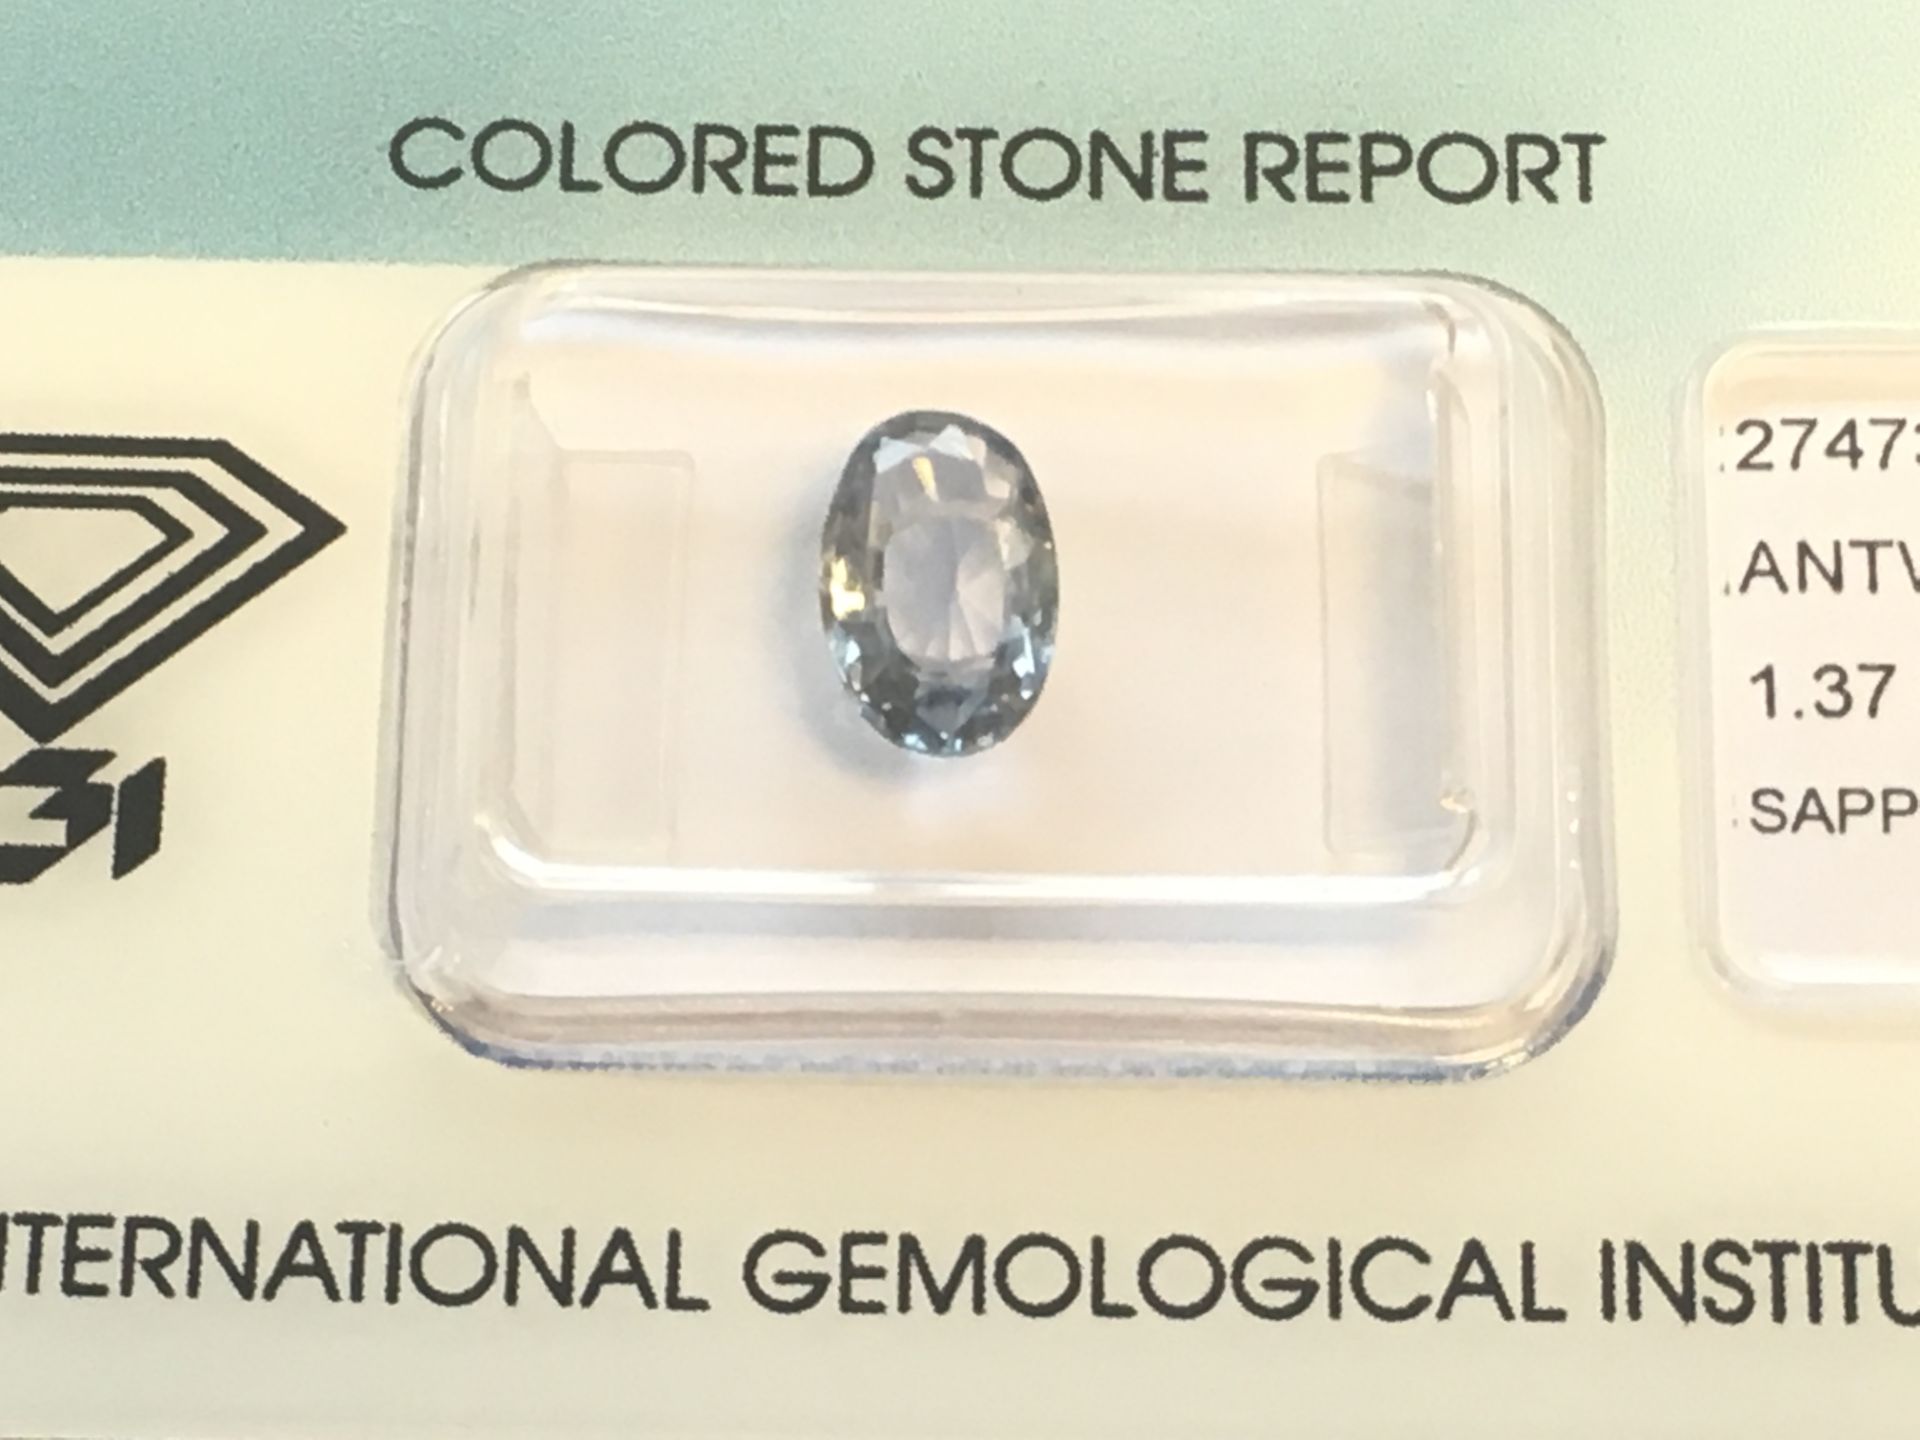 1.37Ct Natural Sapphire With Igi Certificate - Image 2 of 3